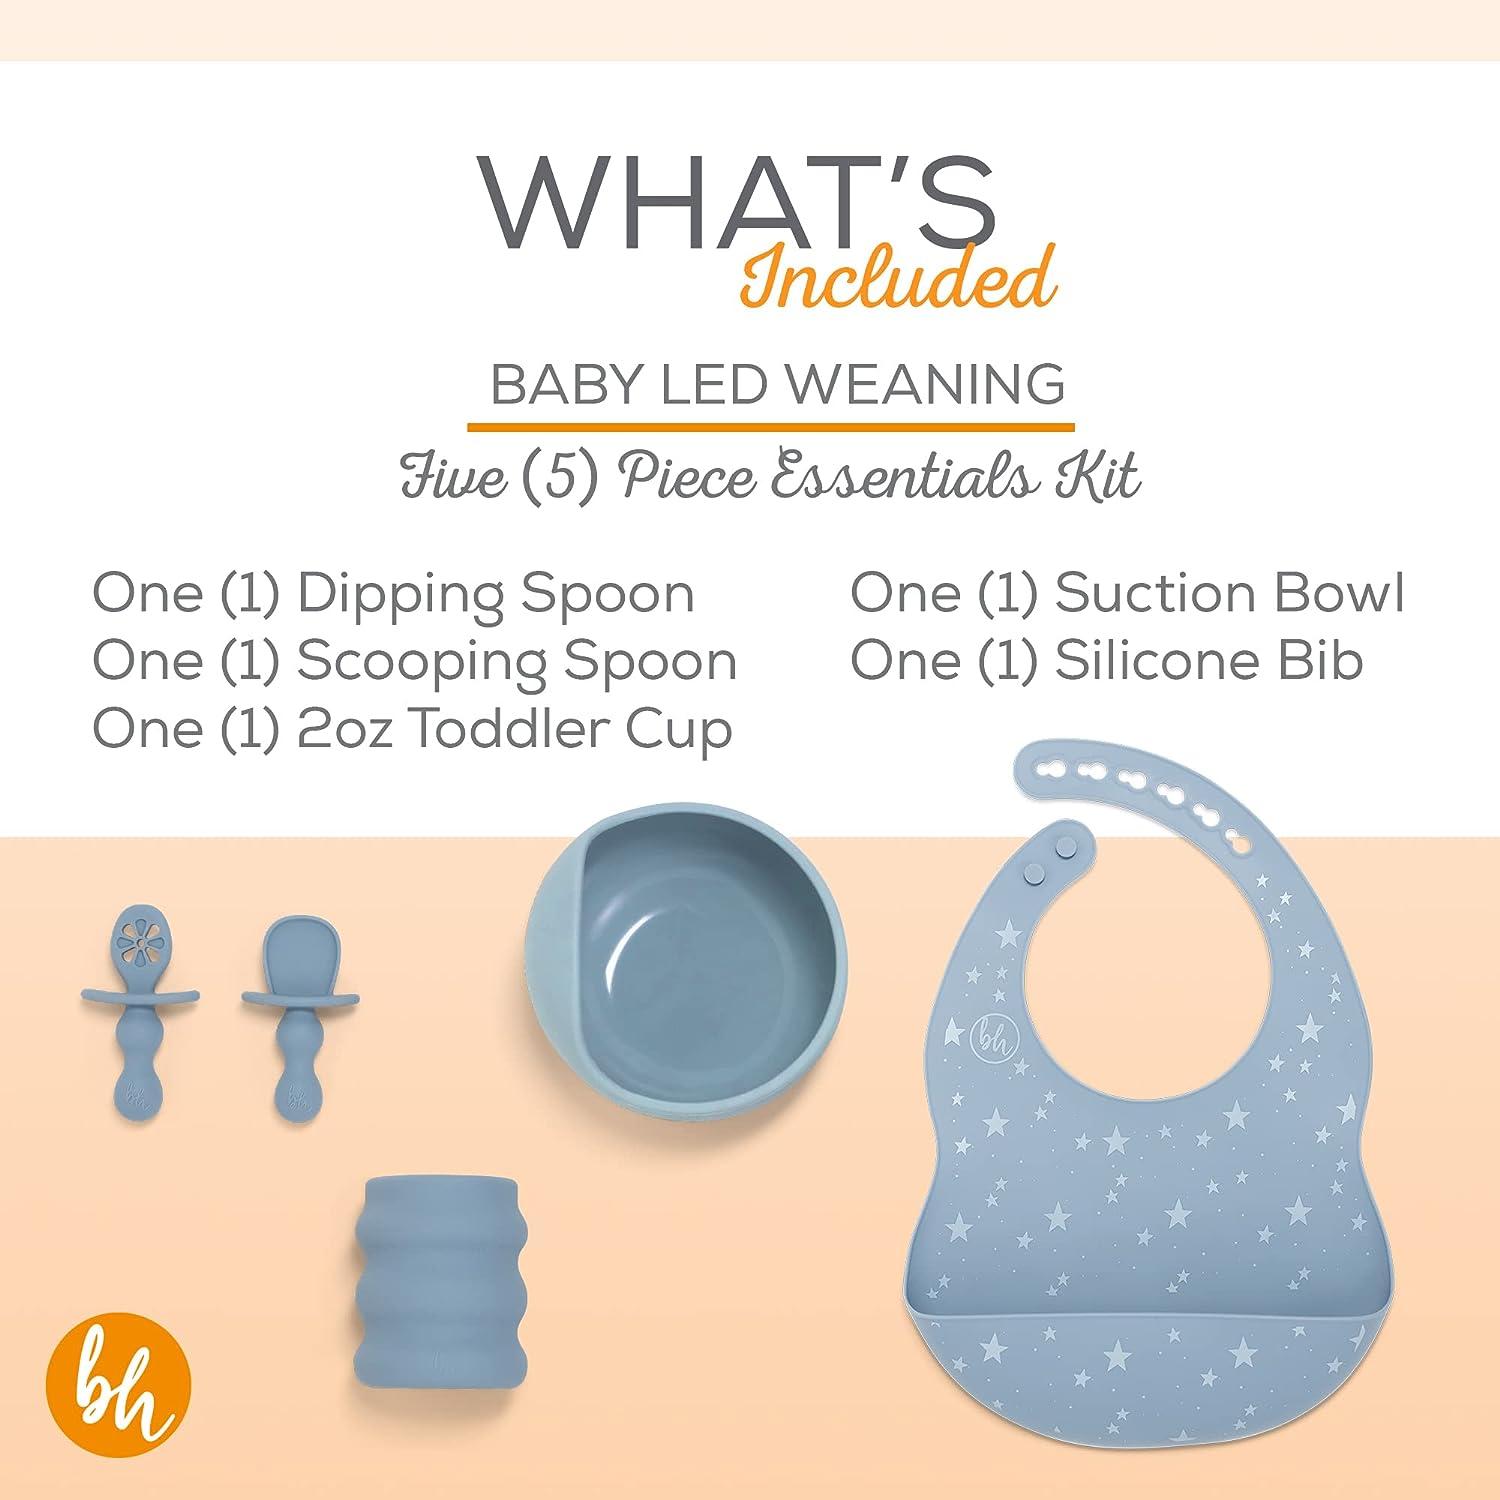 Baby Led Weaning Pre-Spoon (Stage 1 & Stage 2)